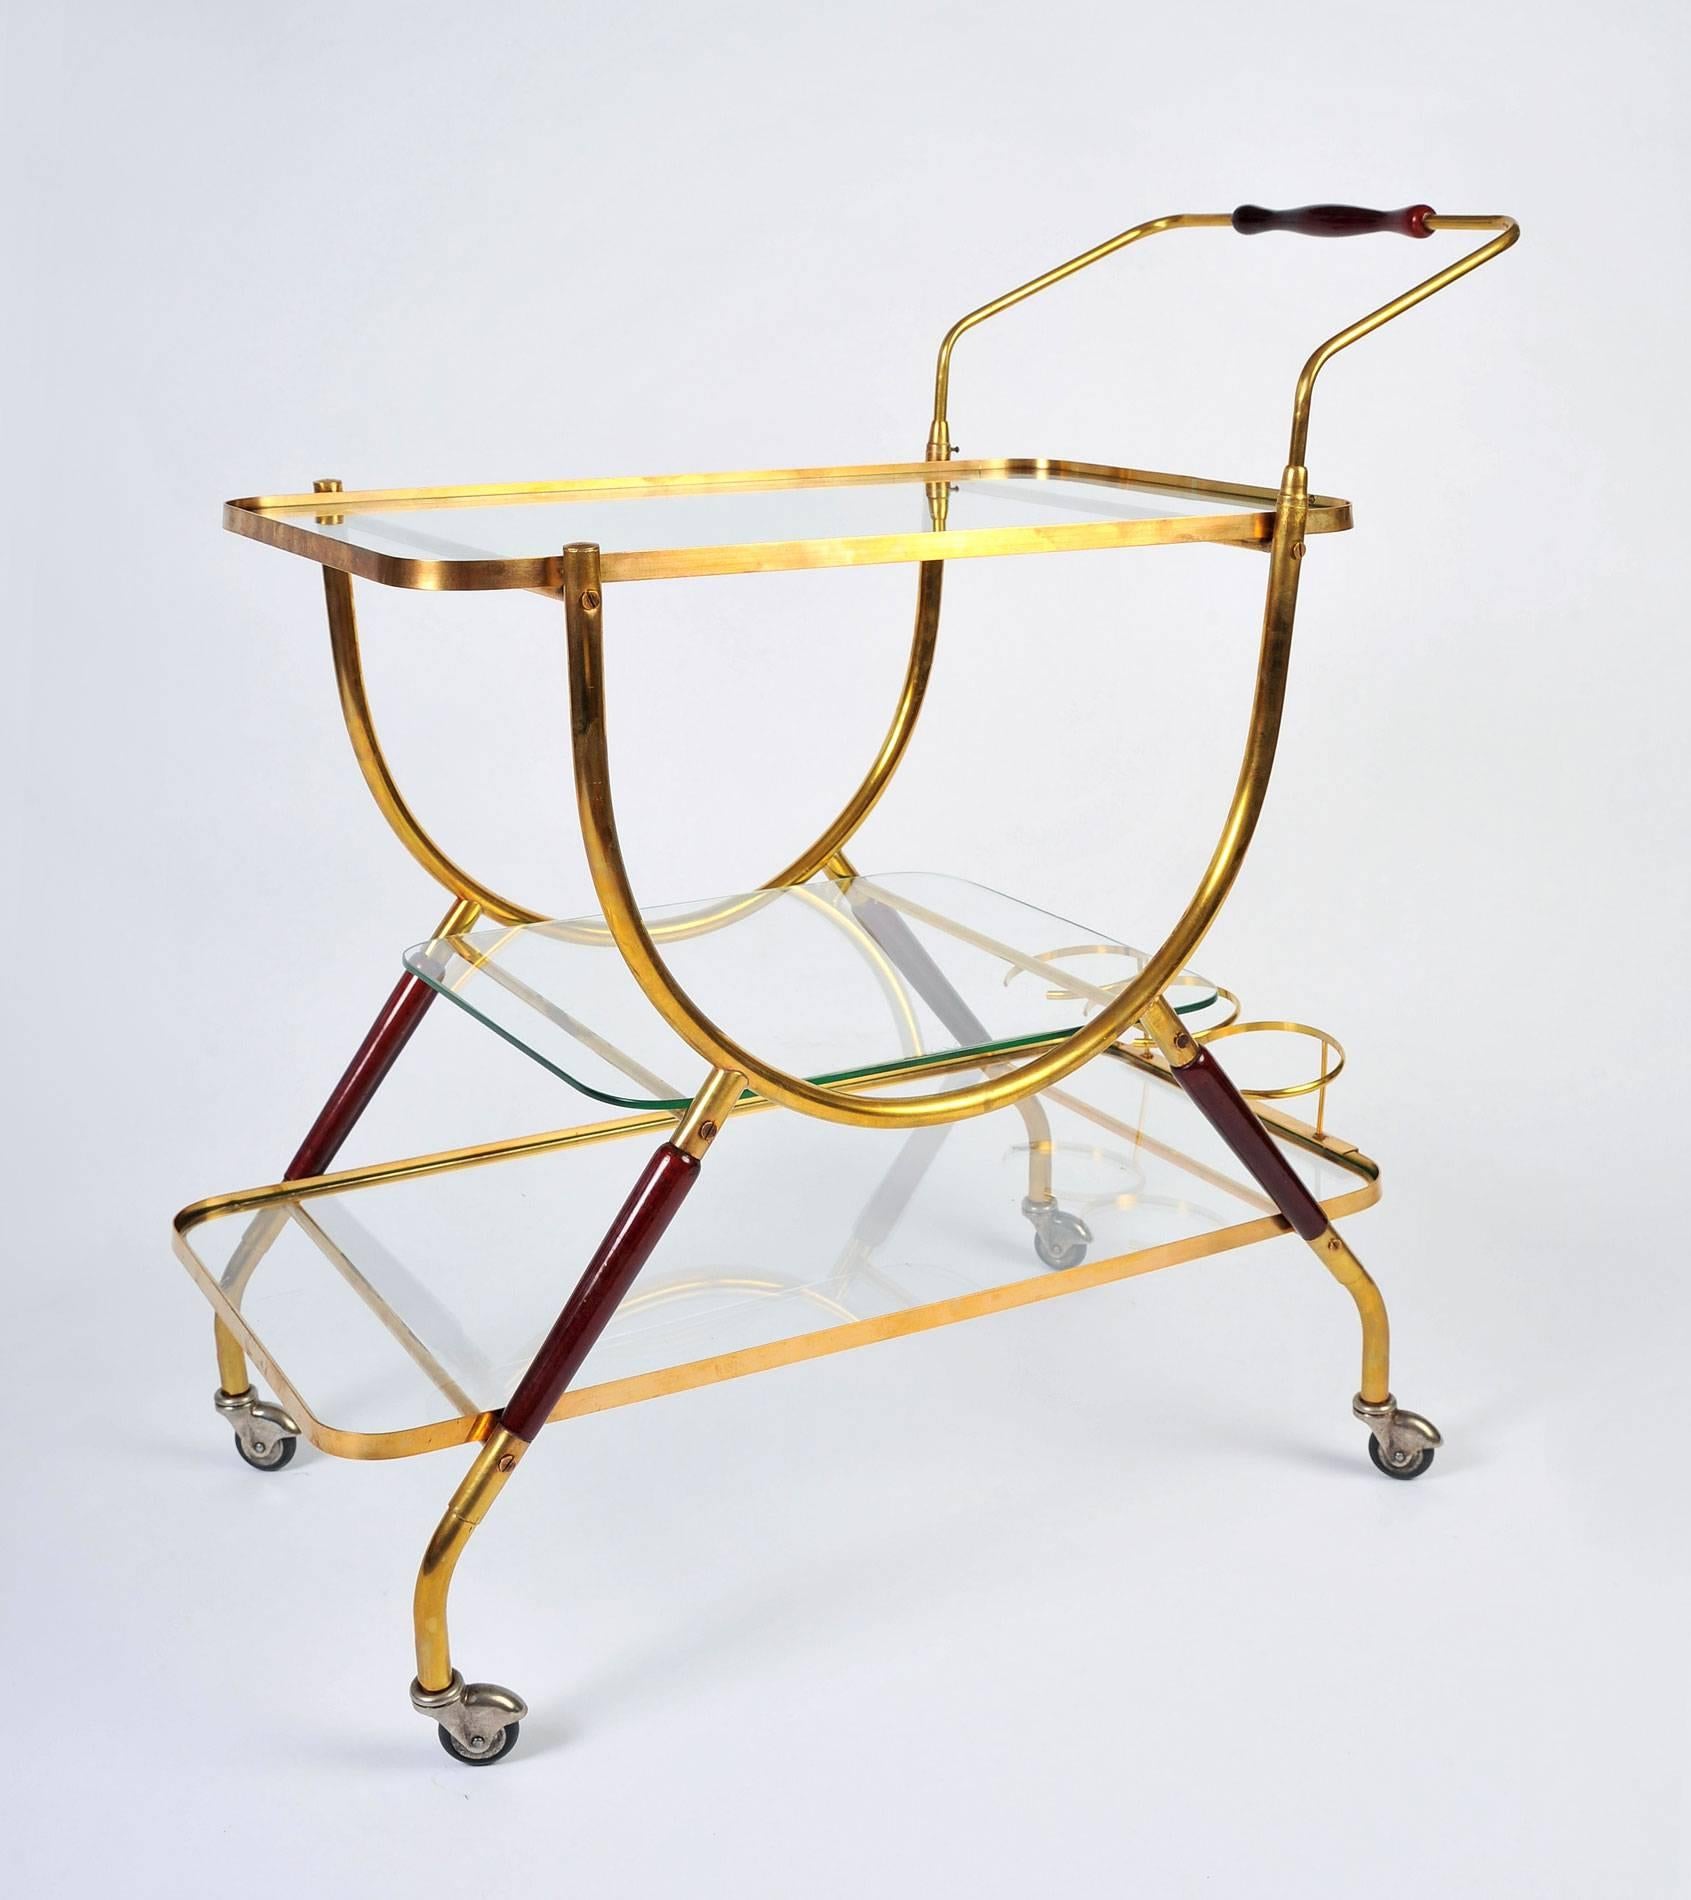 Elegantly practical French bar cart with brass frame, deep red wooden leg detail and matching red handle. Three glass shelves and three bottle holders.